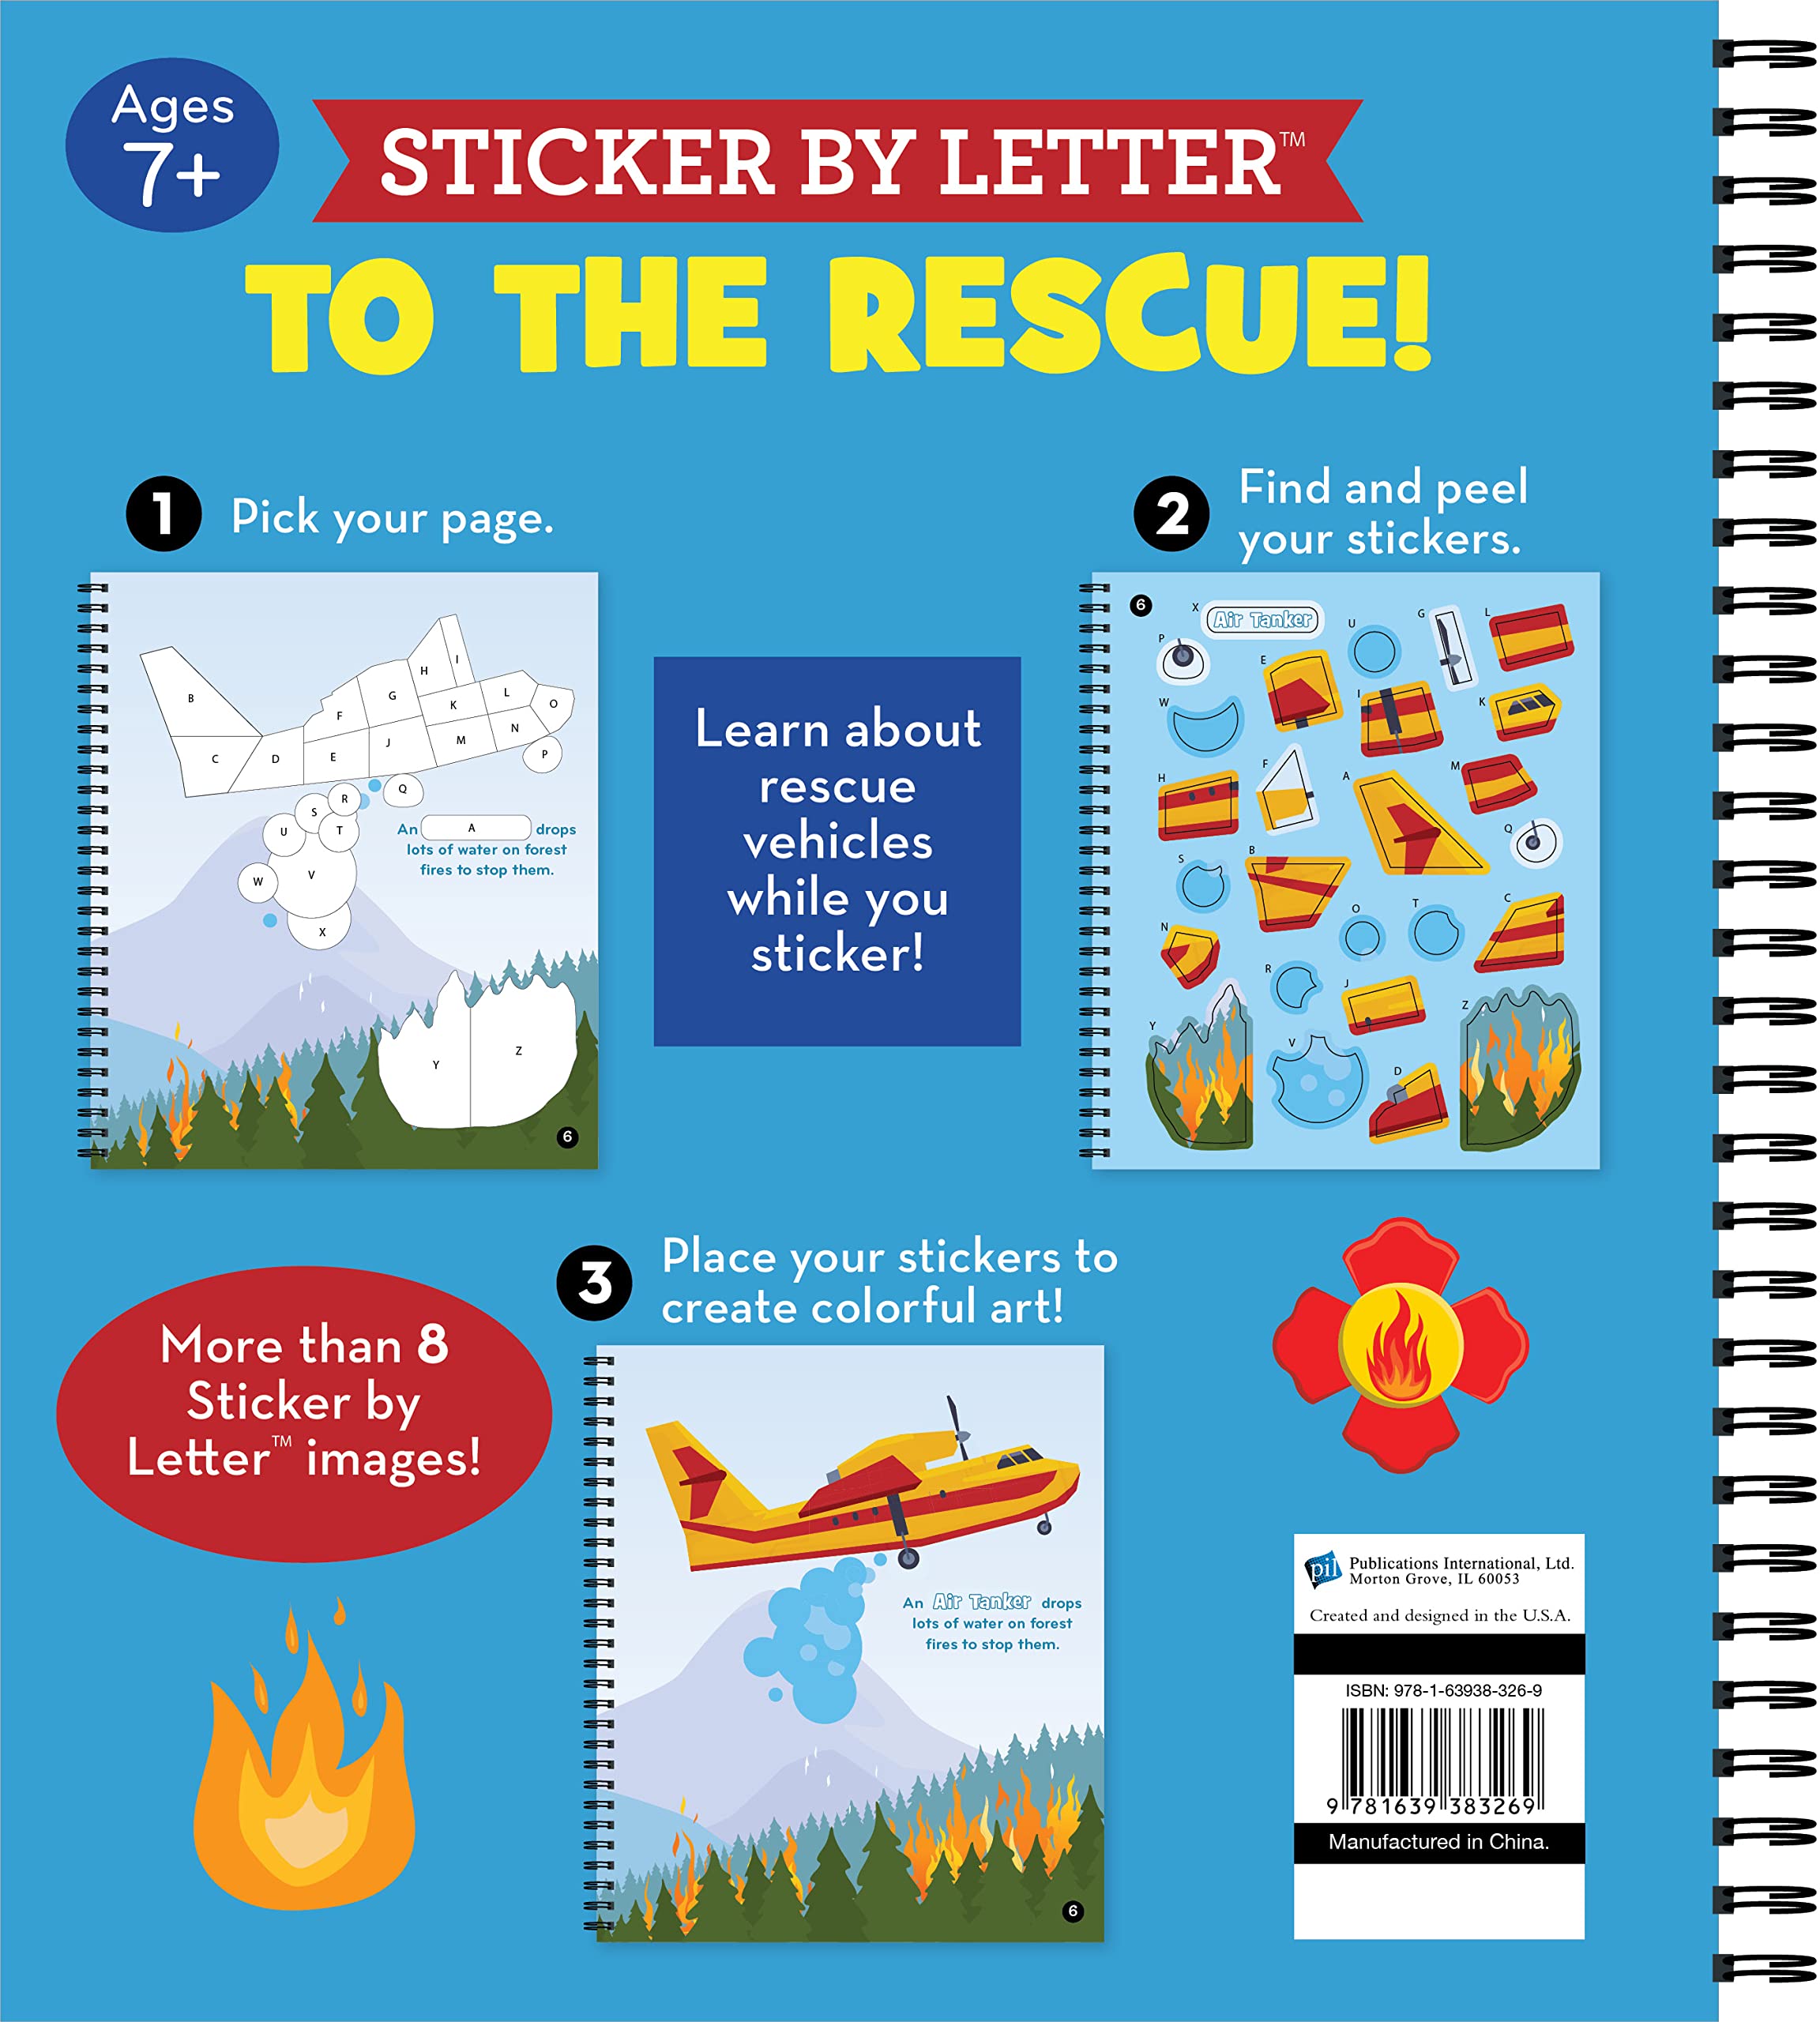 Brain Games - Sticker by Letter: To the Rescue